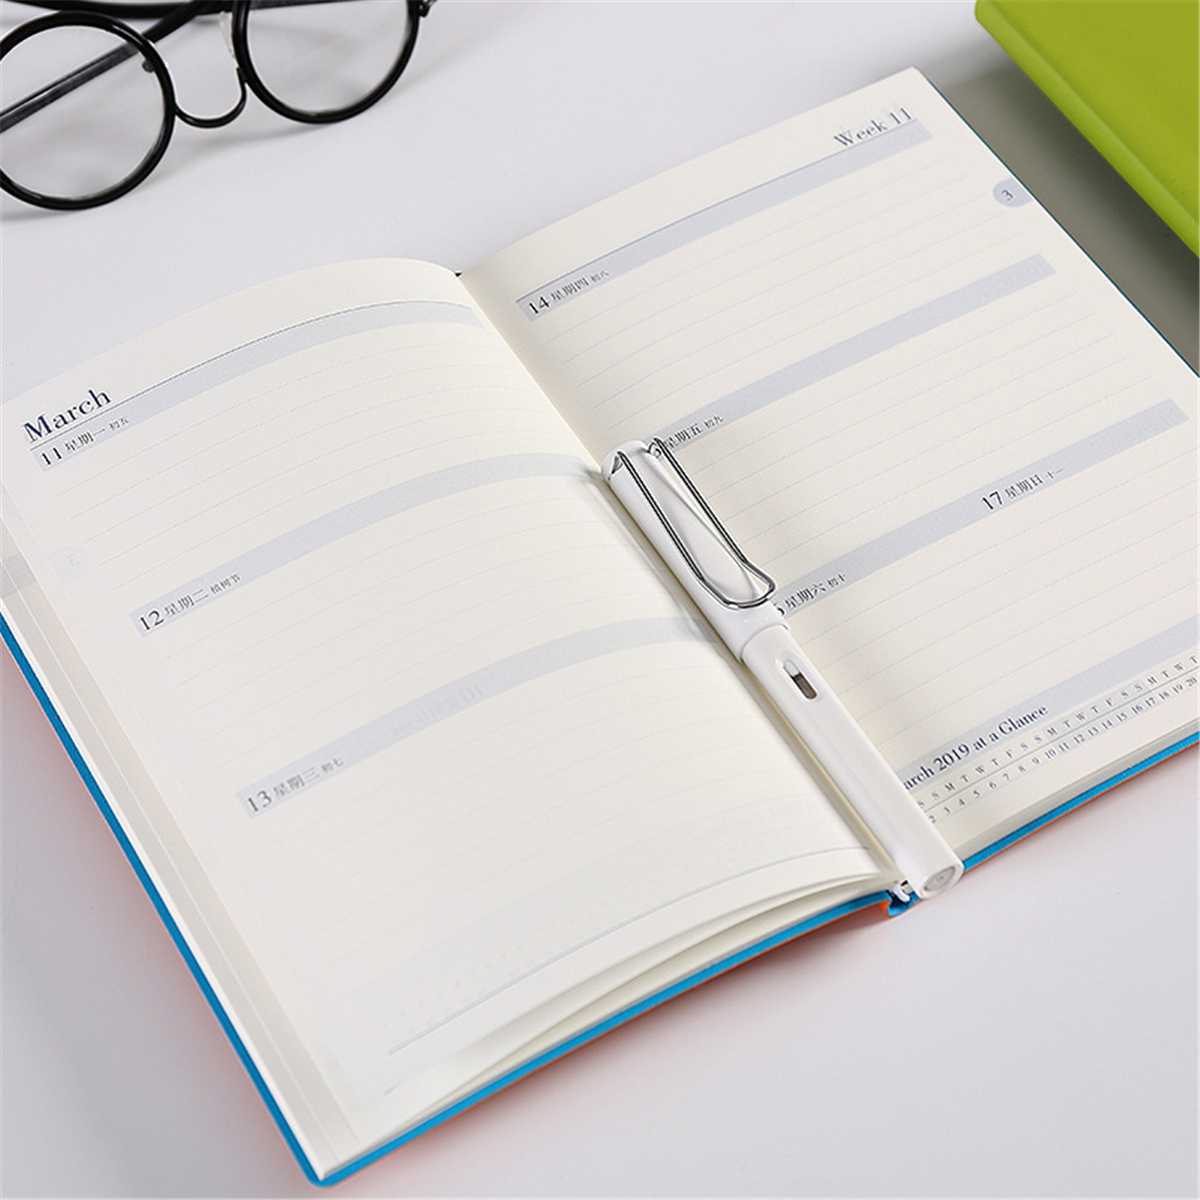 2019-2020-Weekly-Monthly-Journal-Planner-Diary-Scheduler-Organizer-Agenda-for-Study-Business-Noteboo-1557216-5